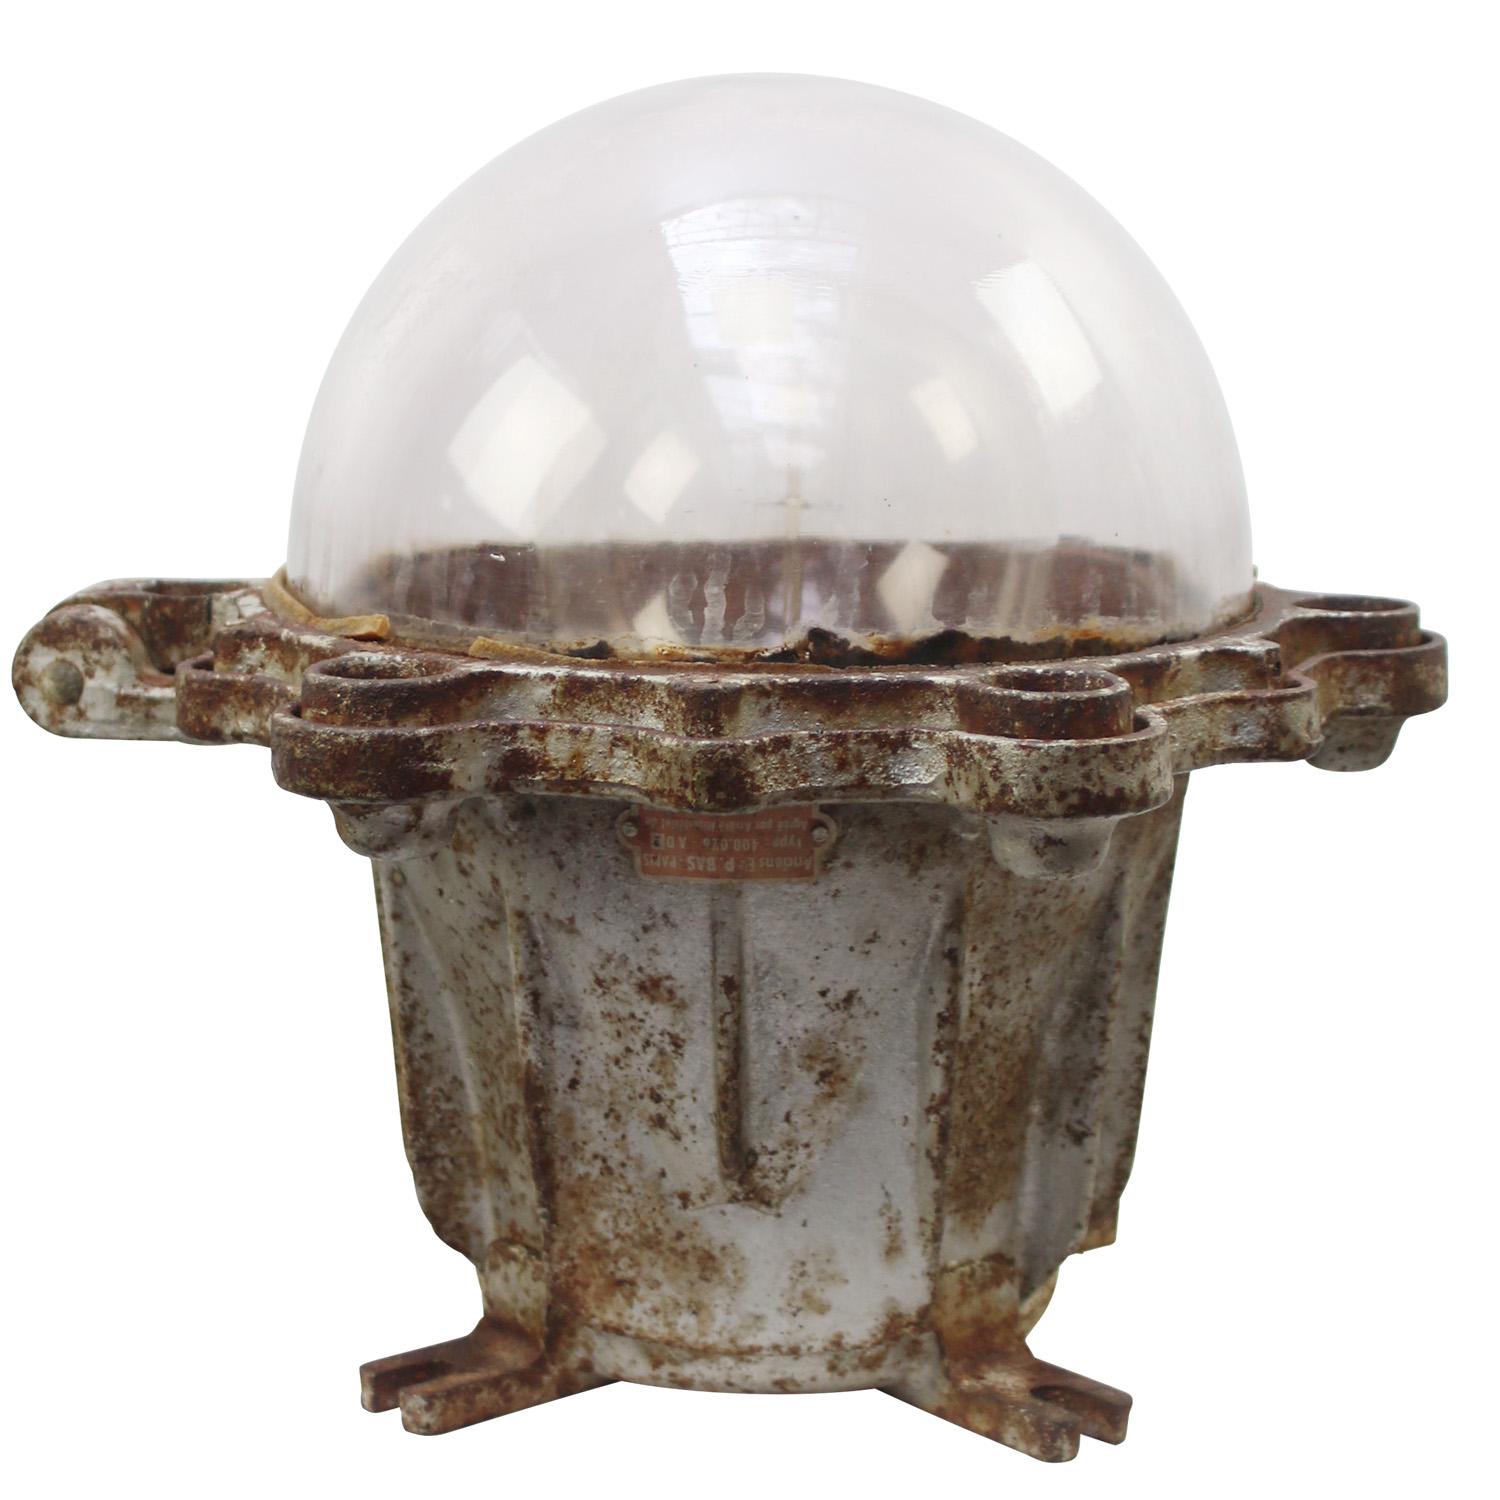 French factory lamp by Perfeclair, France
Gray / Brown cast iron
Clear, light colored glass 

Heavy metal!!!

Weight: 13.40 kg / 29.5 lb

Priced per individual item. All lamps have been made suitable by international standards for incandescent light